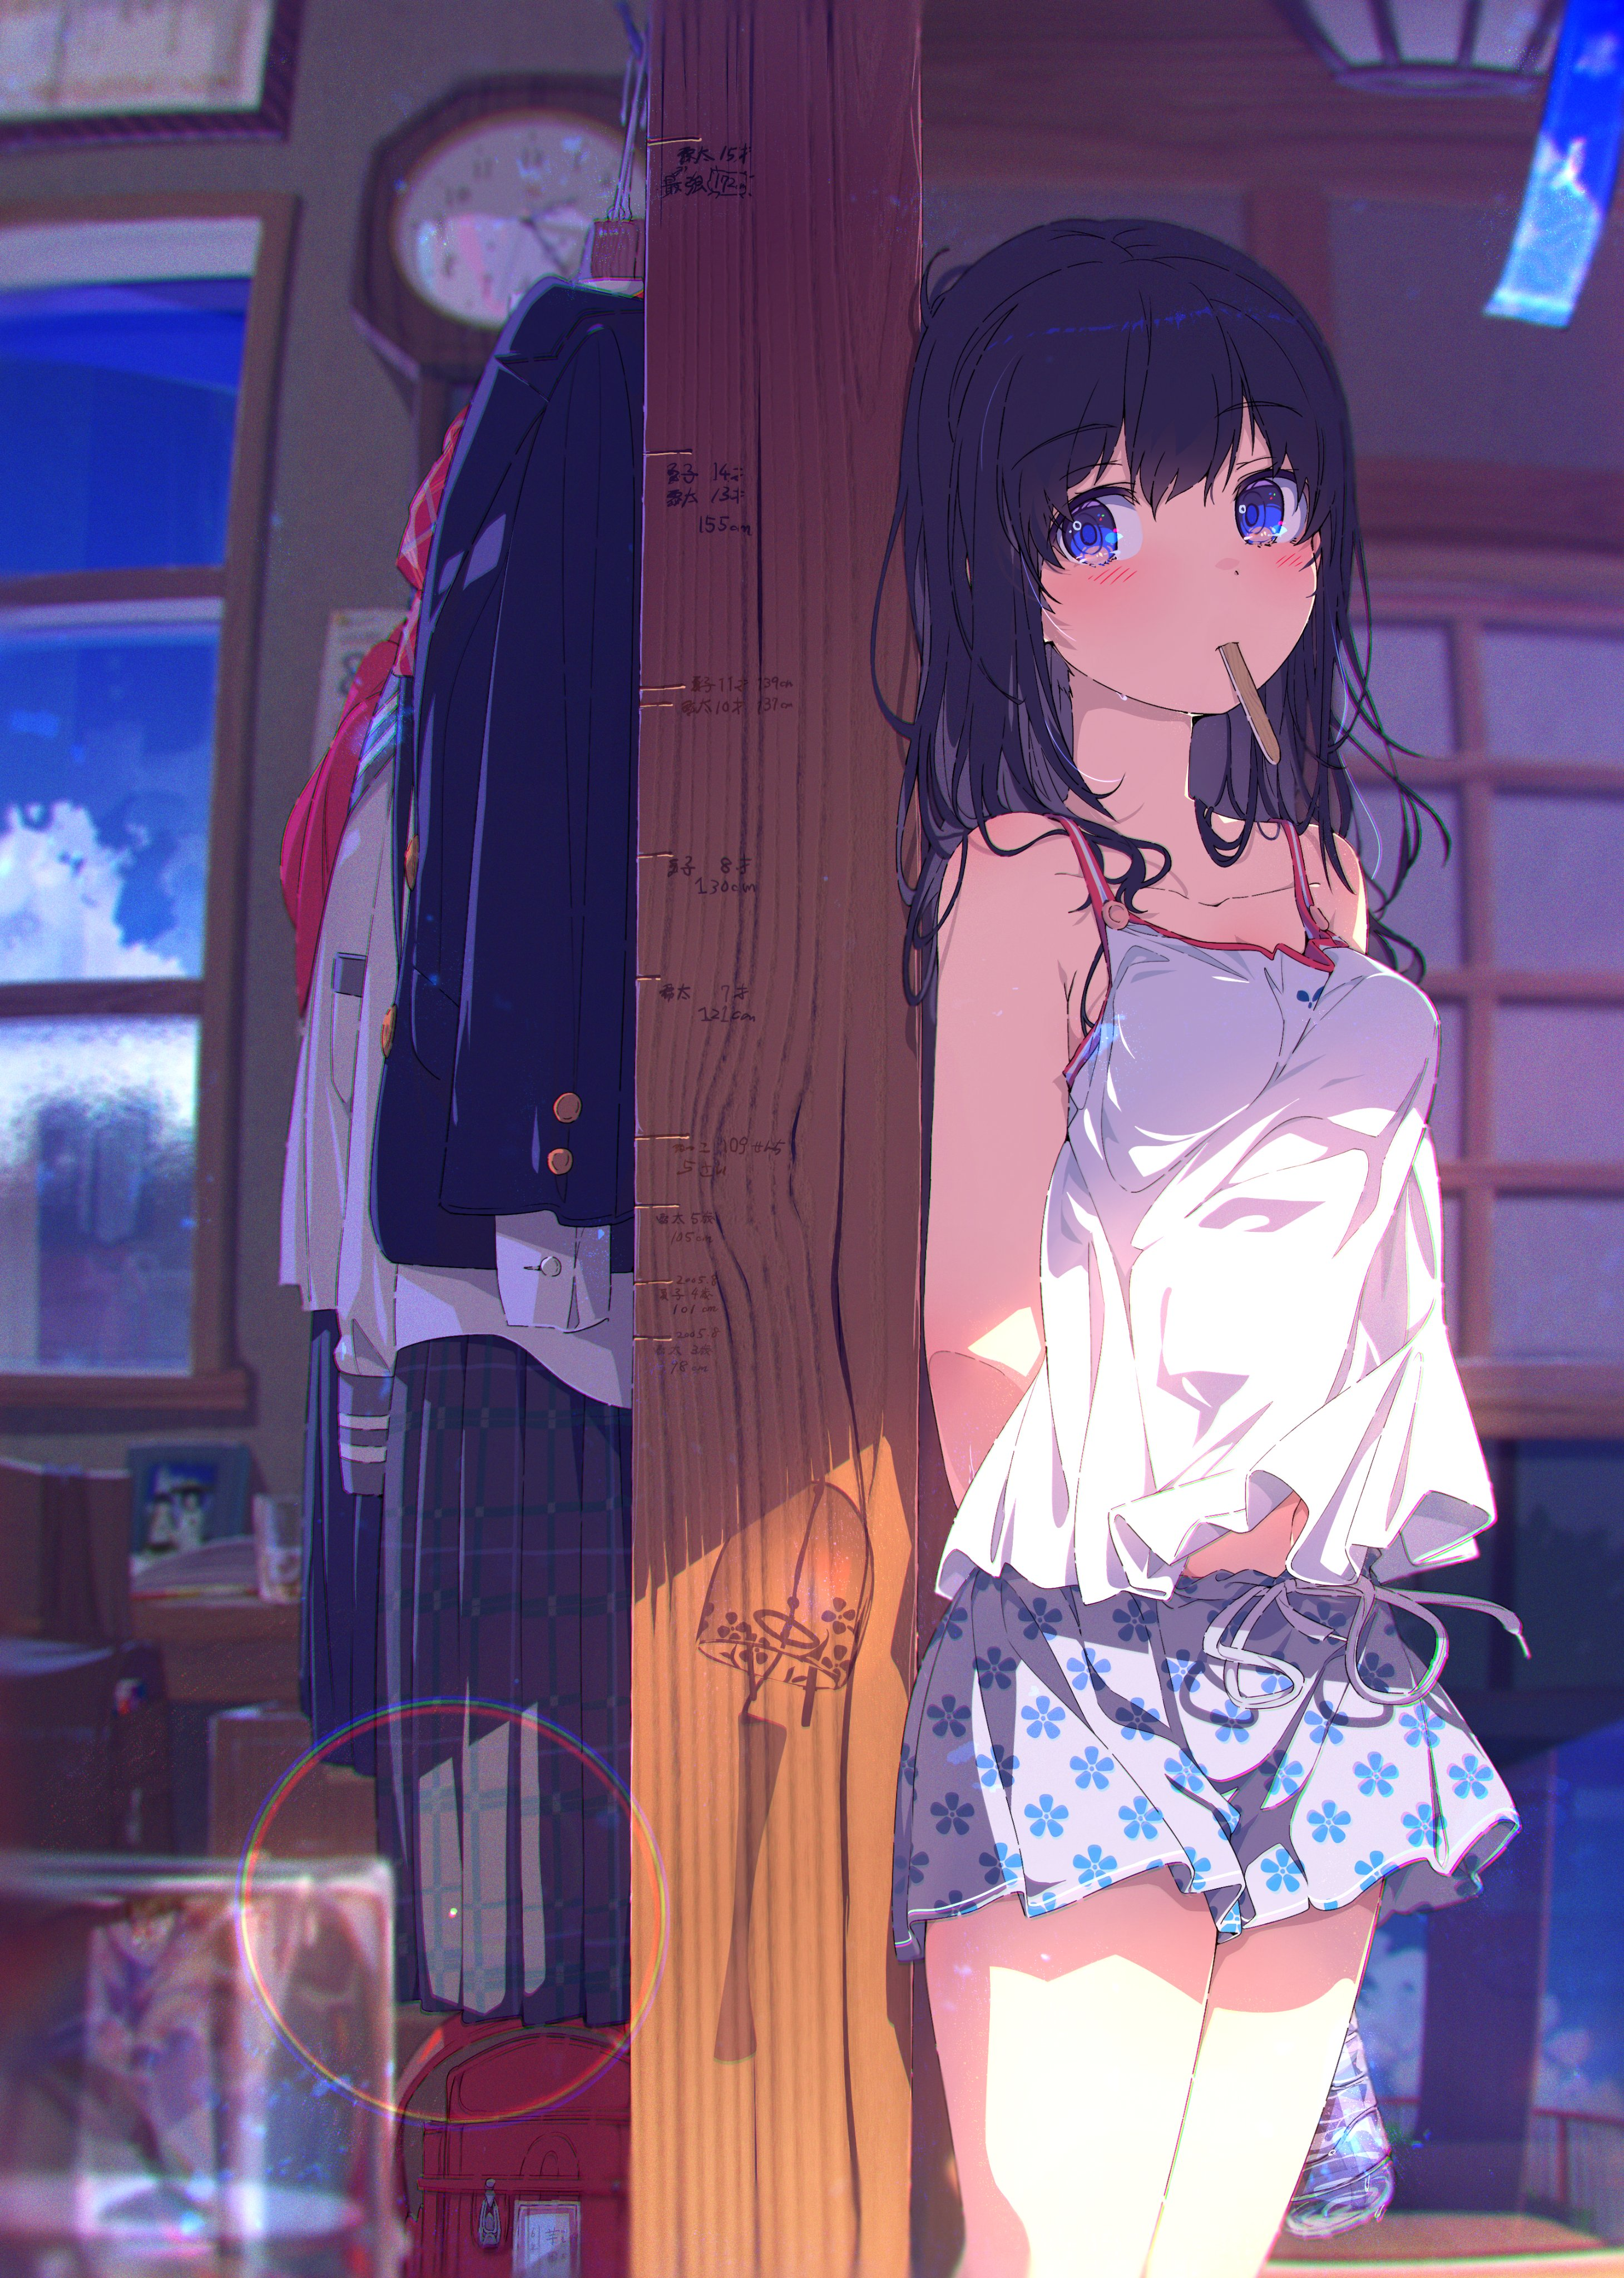 Anime 2920x4096 anime anime girls long hair sunlight sky school uniform Ogipote portrait display blushing window clouds water bottle standing looking at viewer clocks